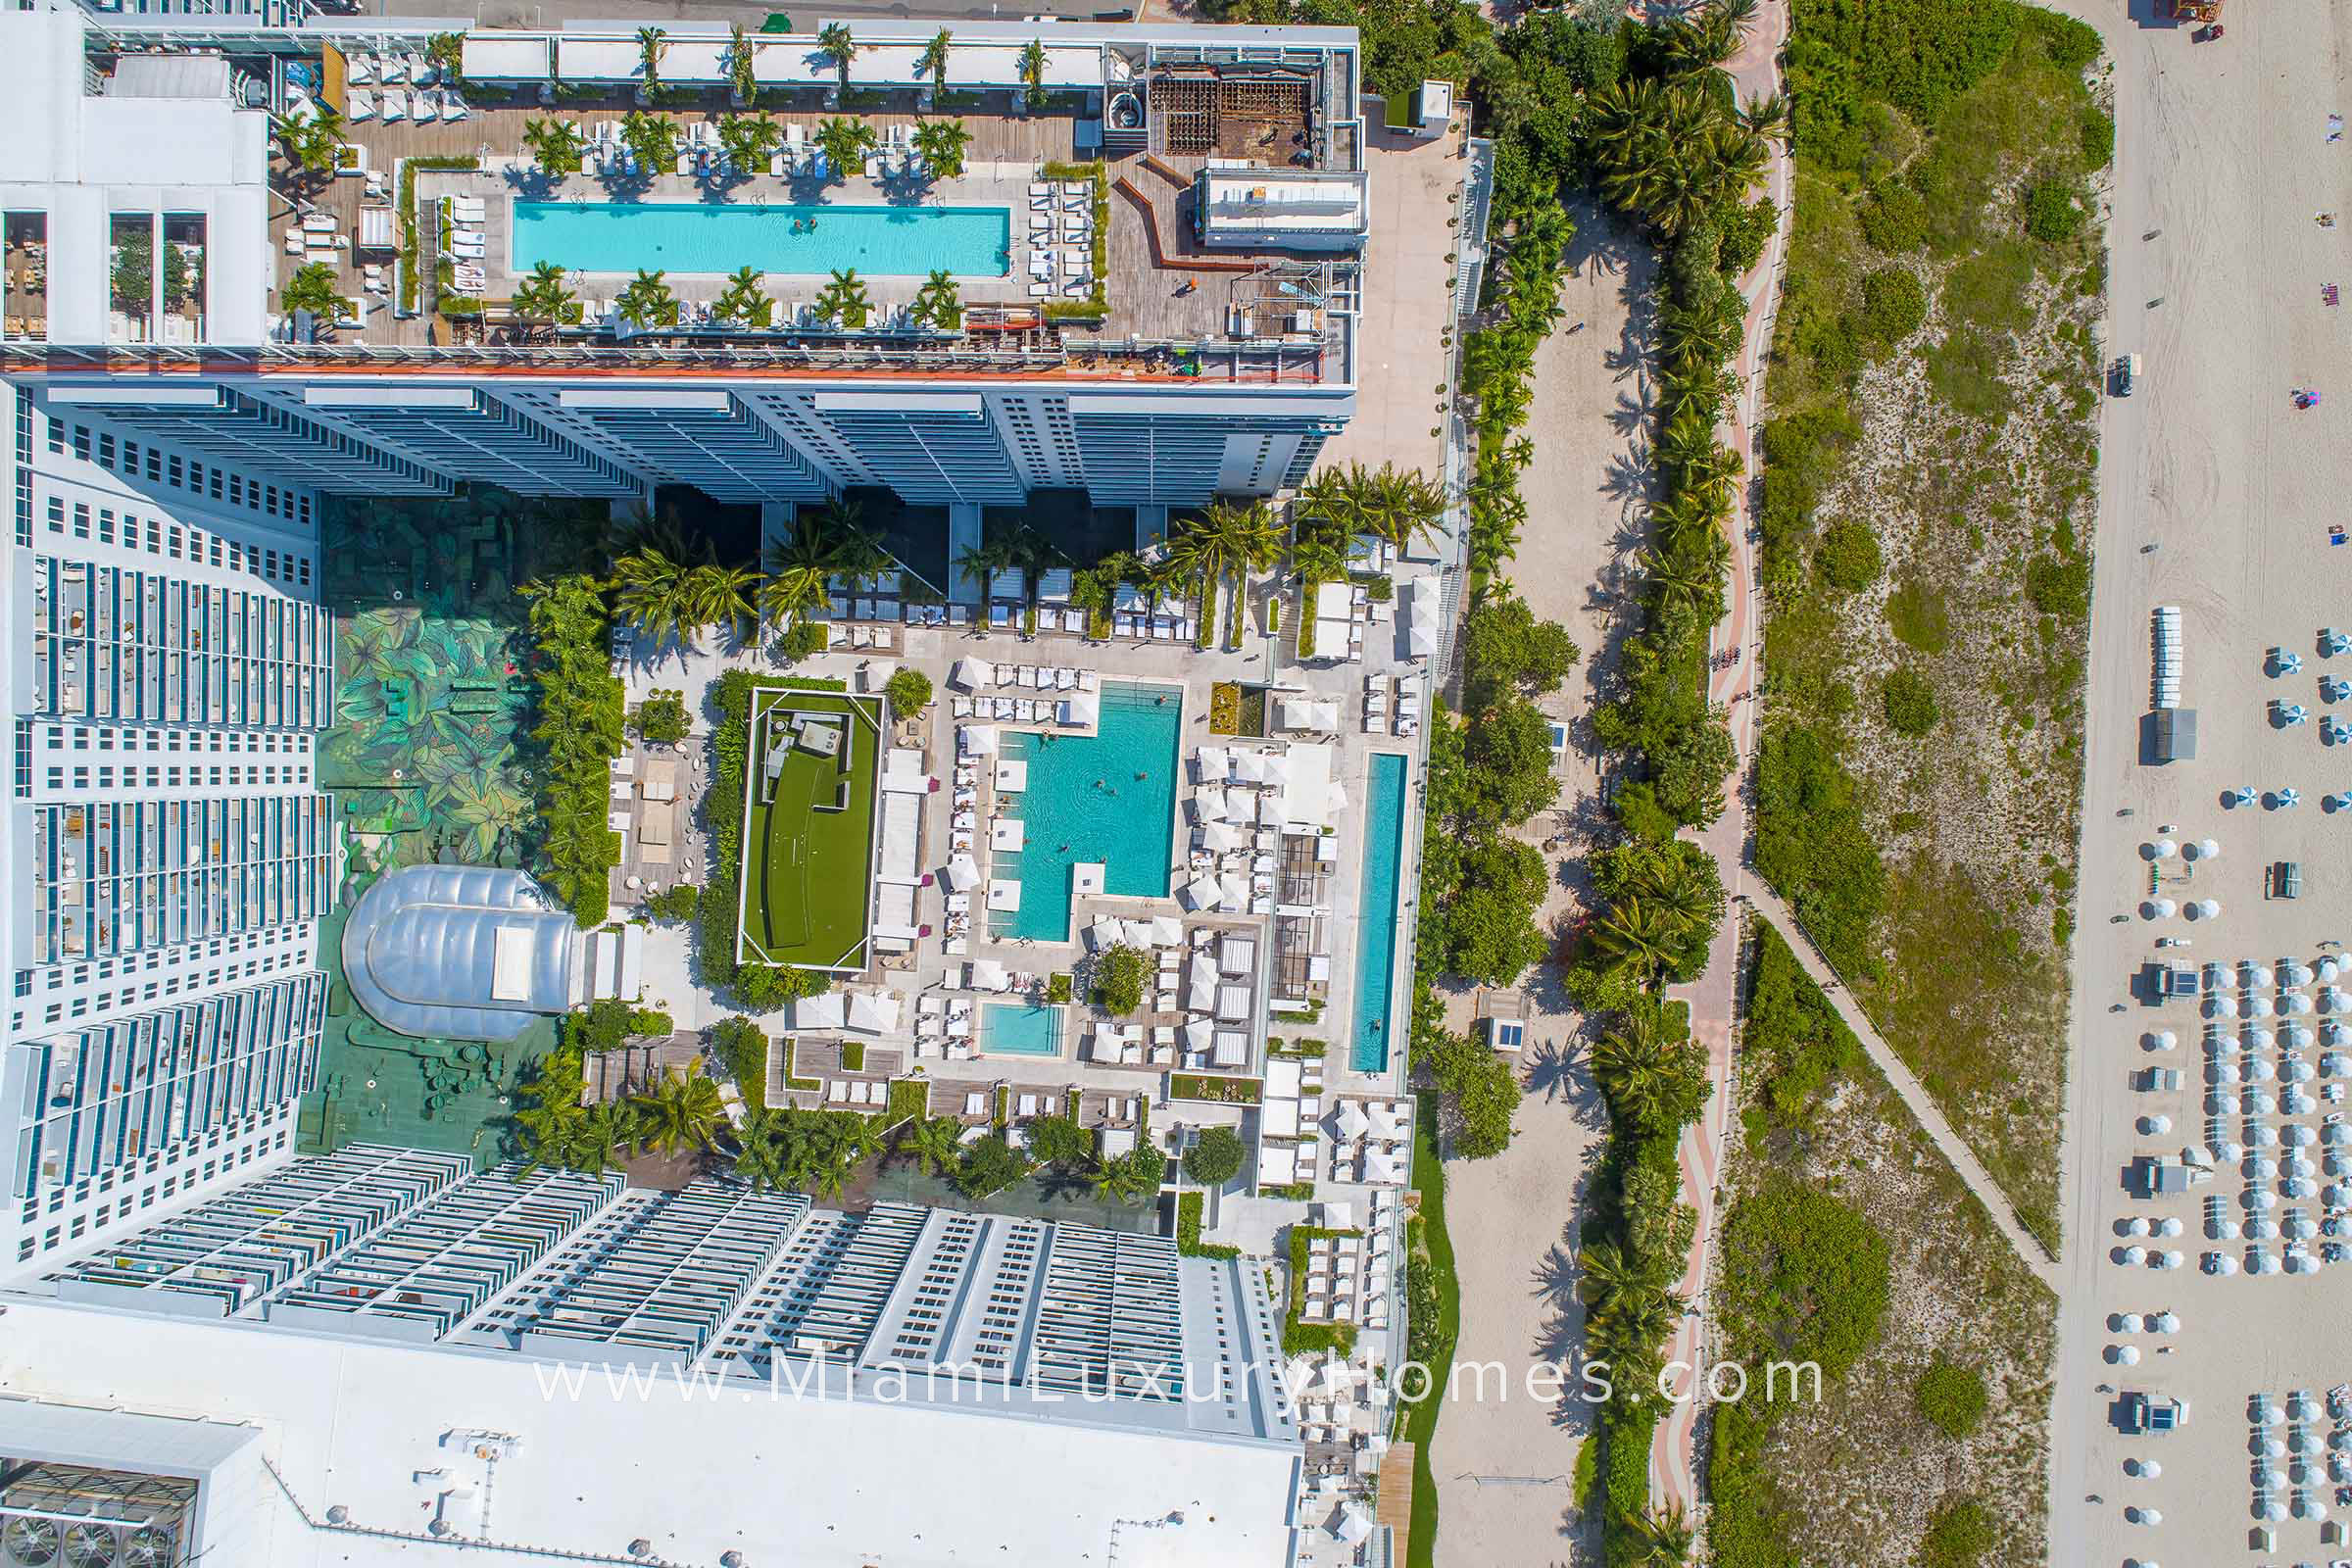 Aerial View of the Amenities at 1 Hotel in South Beach